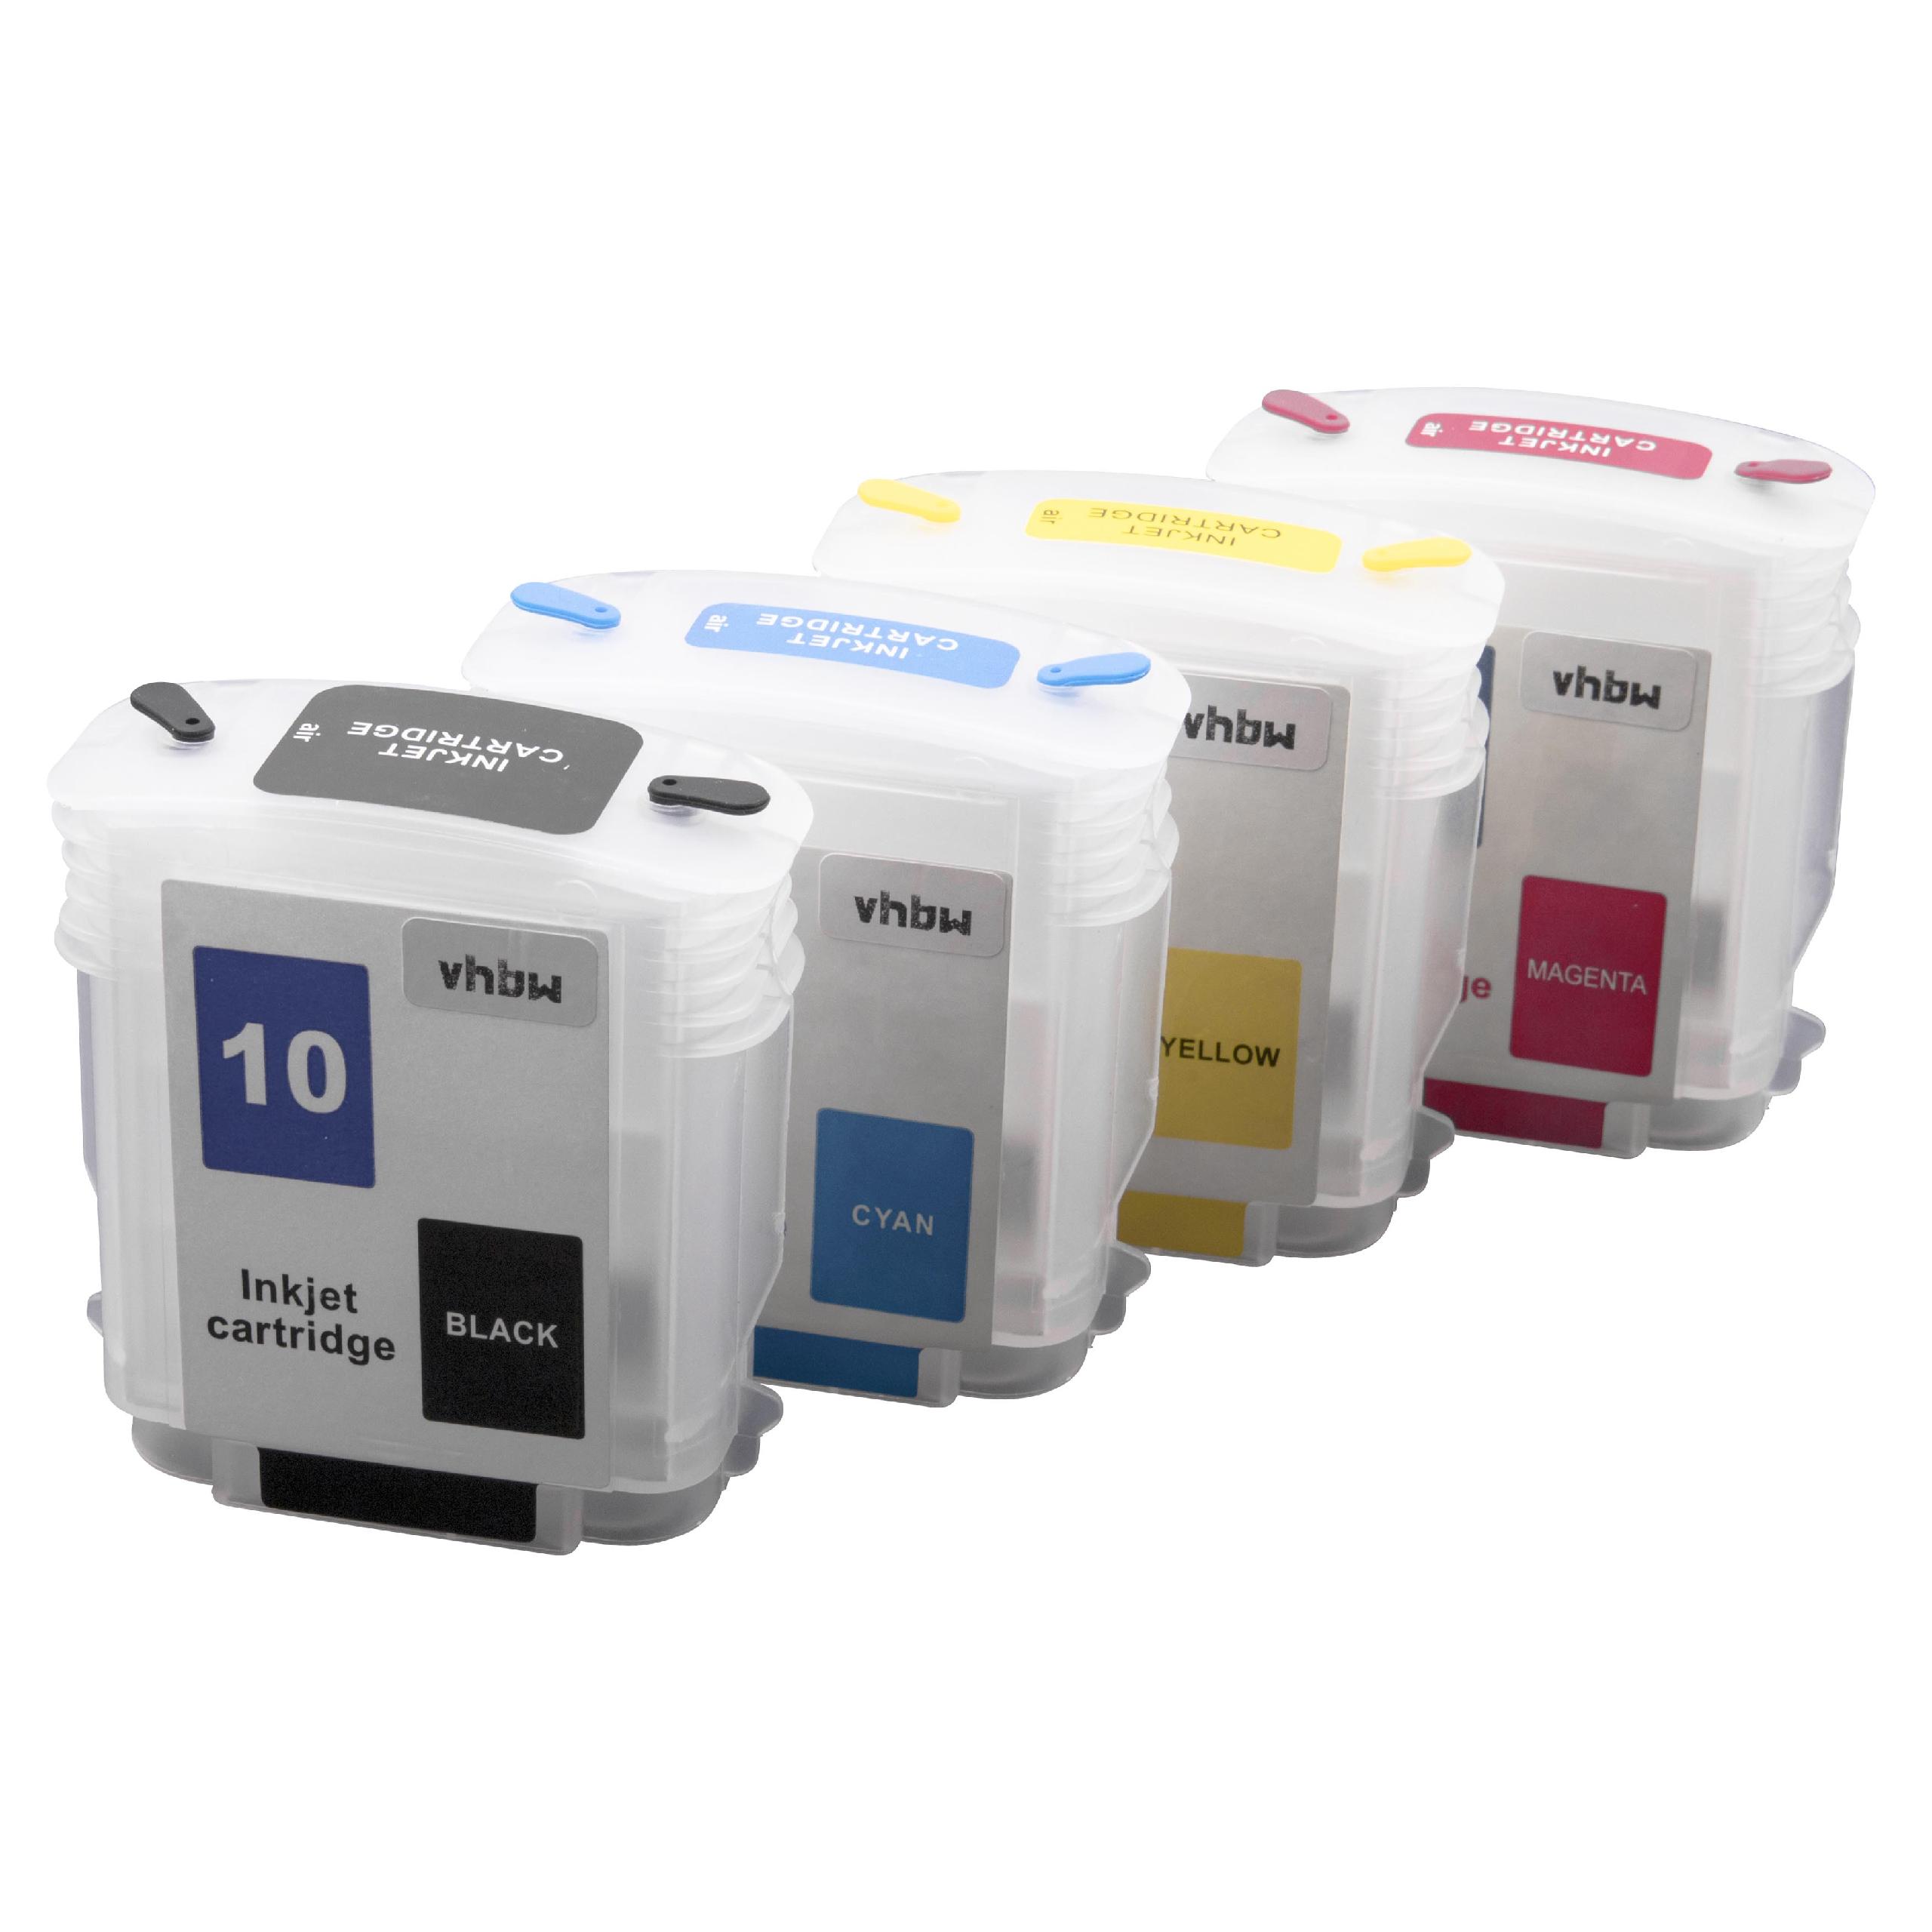 4x Ink Cartridge replaces HP 82, 10, C4913A, C4911, C4844 for HPPrinter CISS - B/C/M/Y + Chip